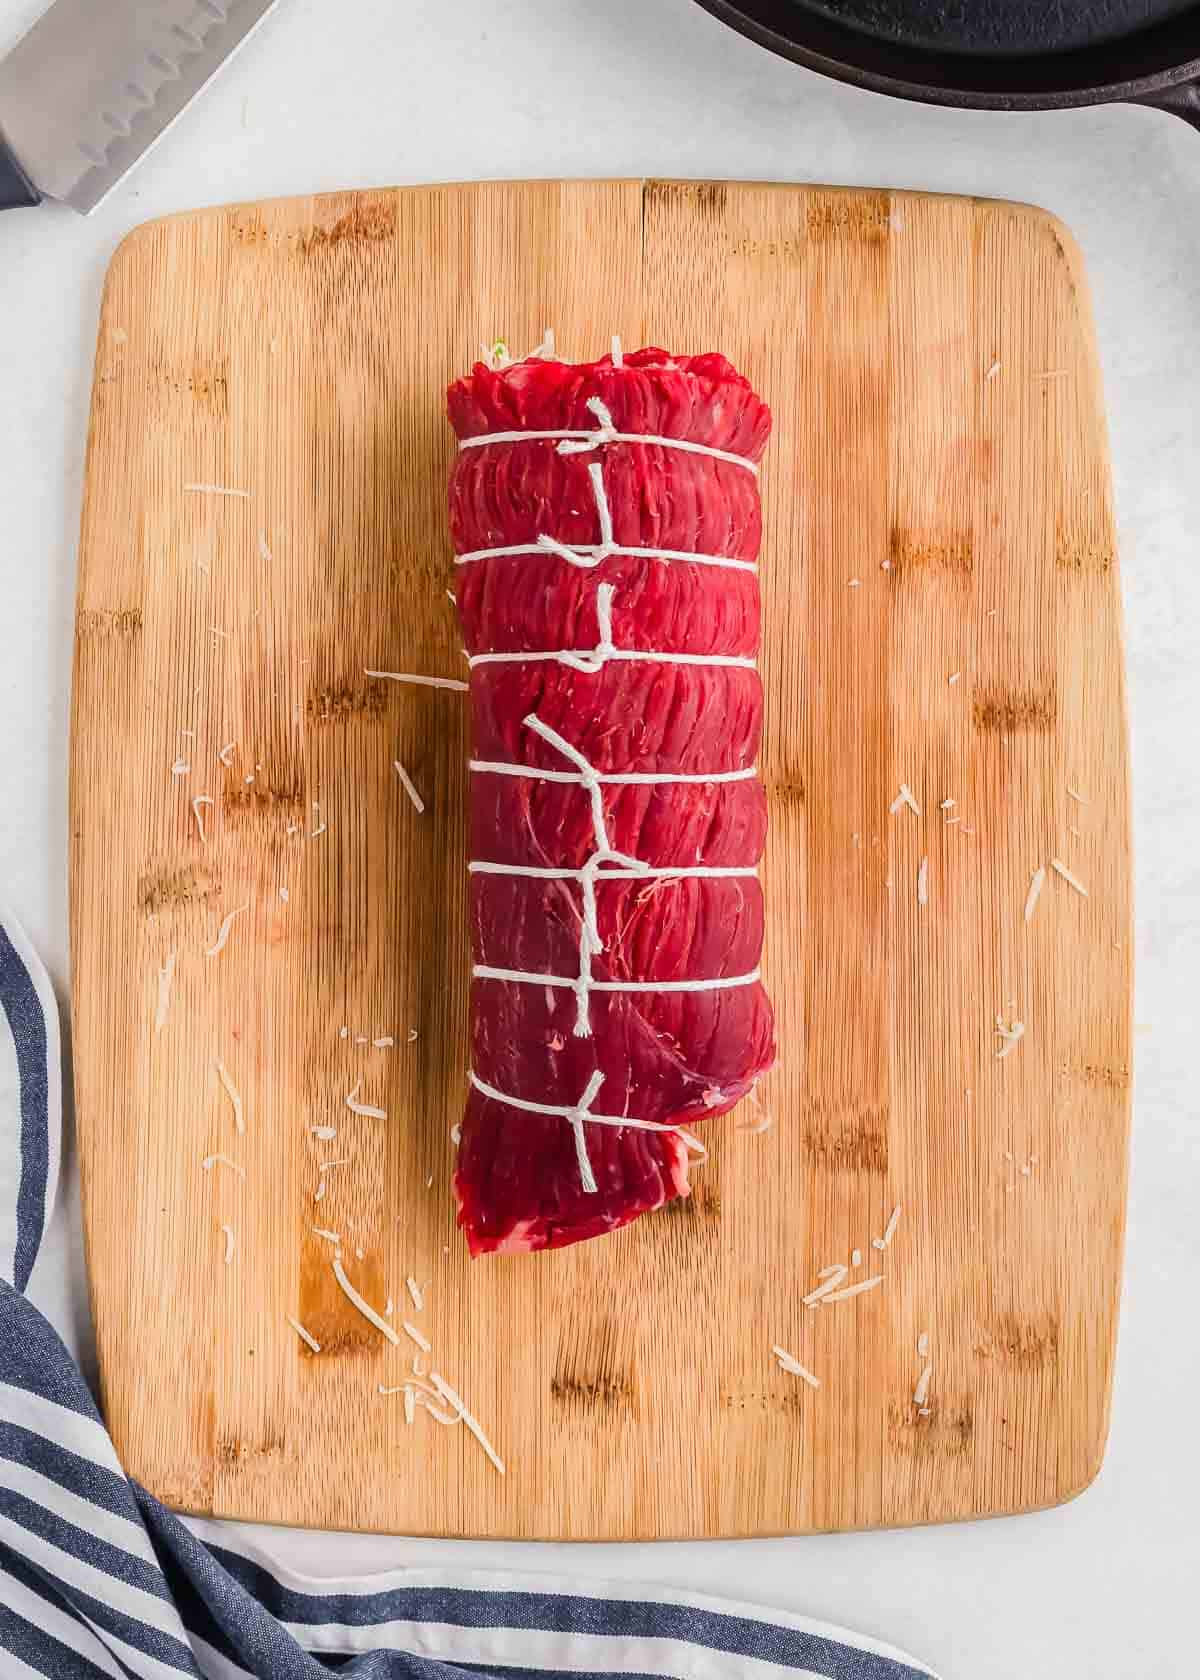 Raw flank steak rolled and tied with butcher's twine on a wooden cutting board.